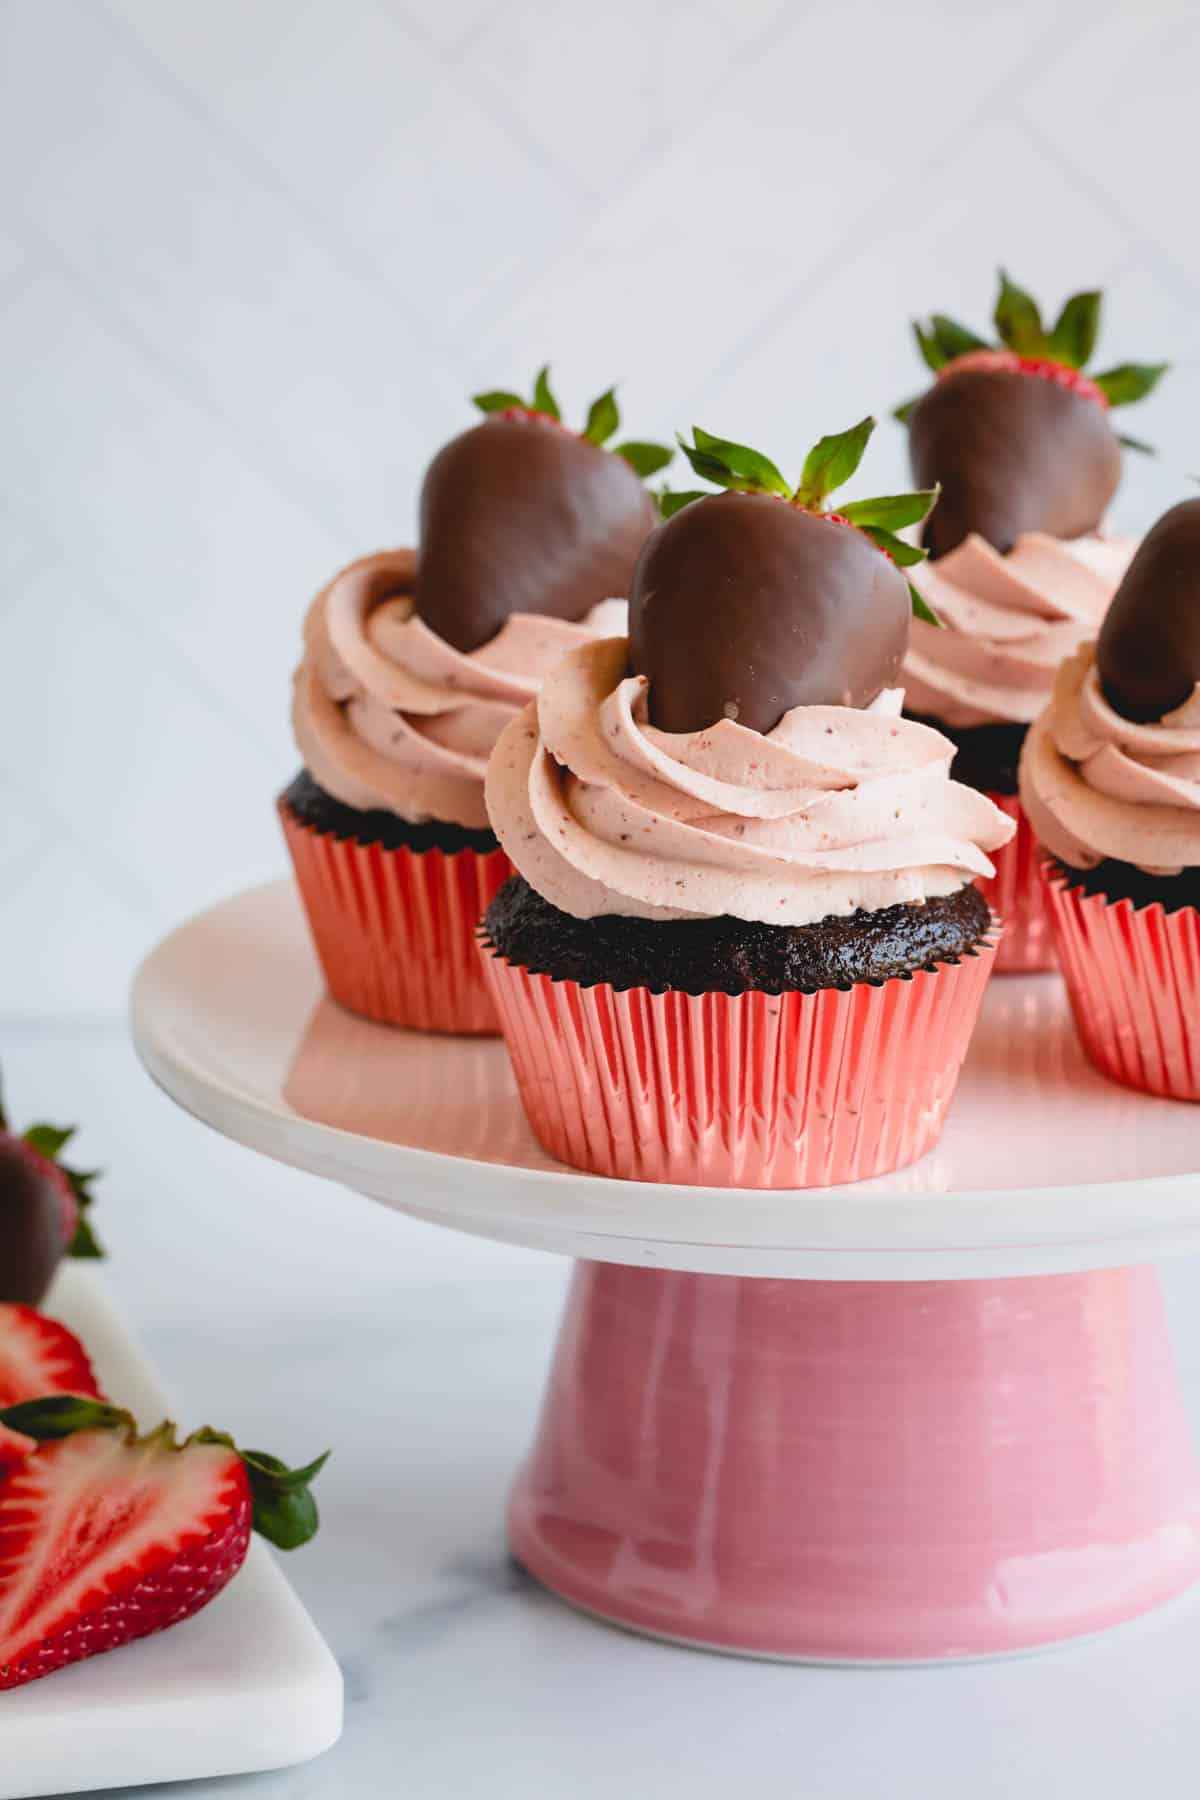 Strawberry chocolate cupcakes topped with chocolate covered strawberries on a cake stand.